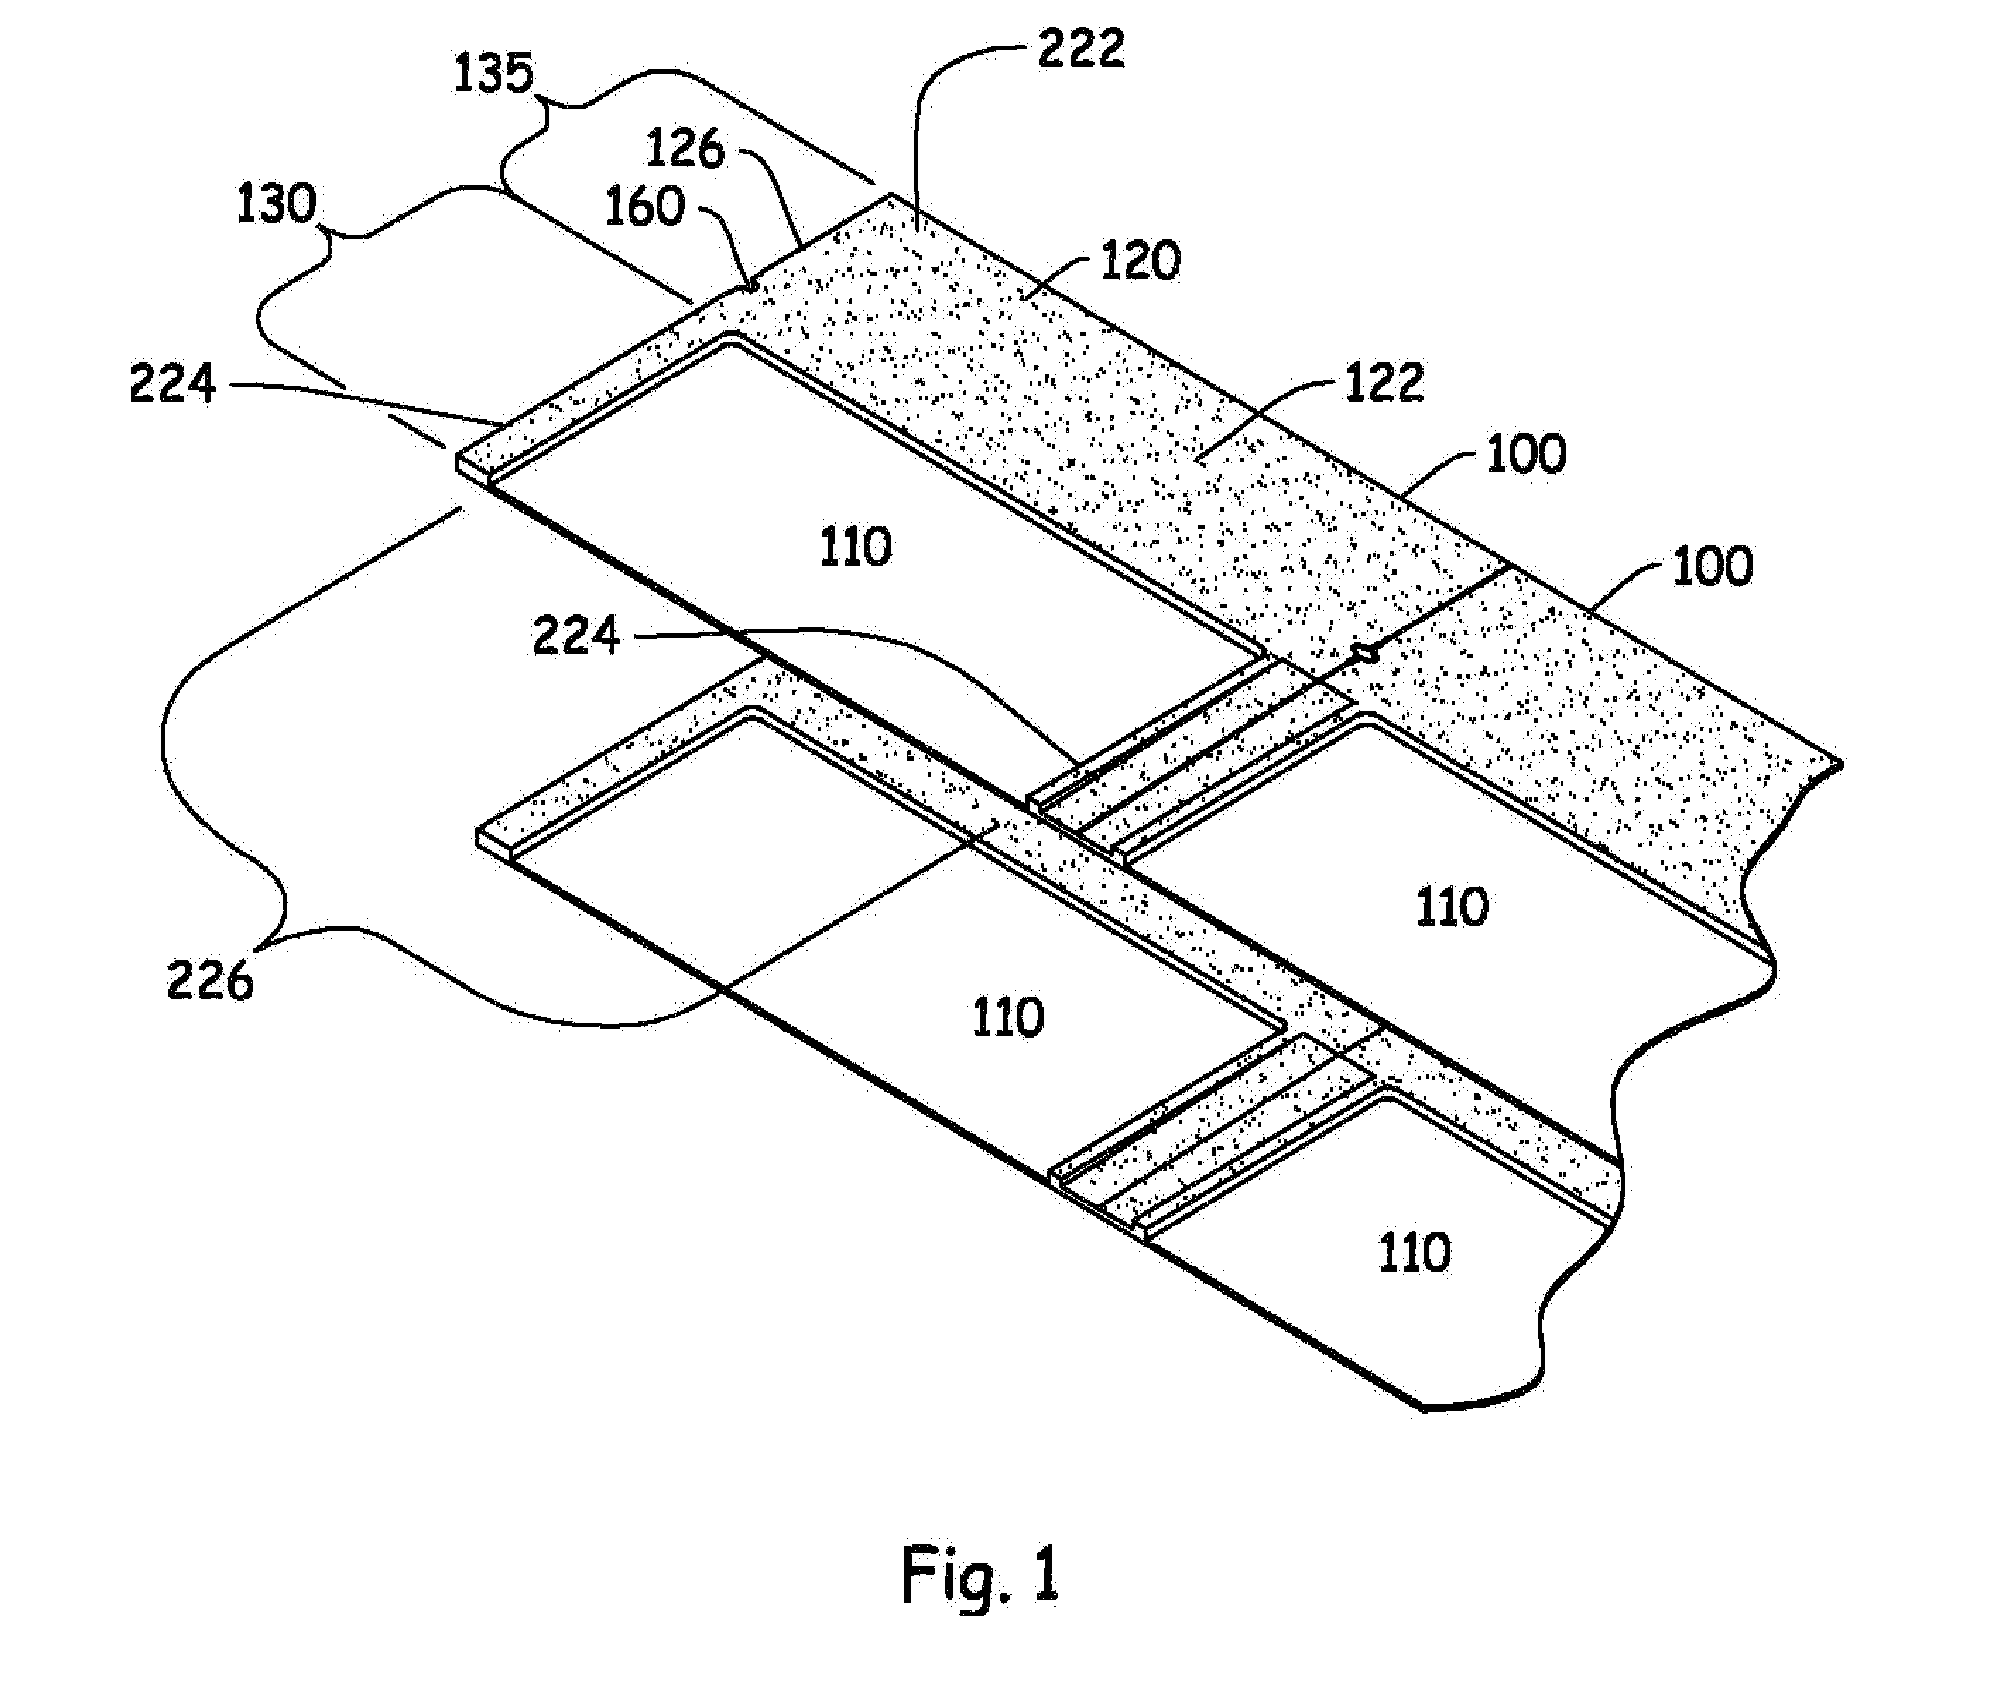 Building integrated photovoltaic having injection molded component